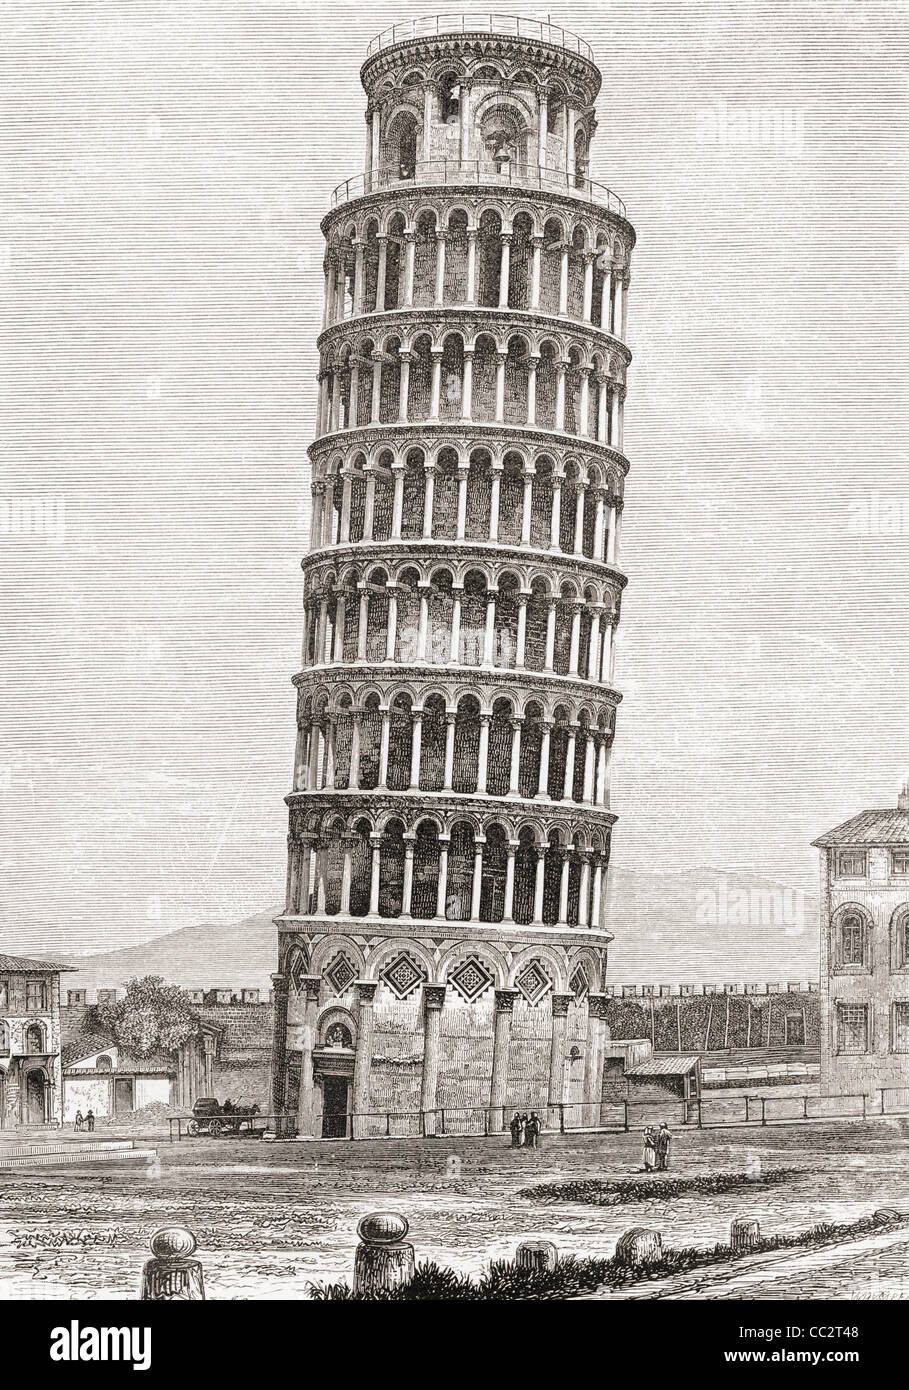 The Leaning Tower, Pisa,Tuscany, Italy in the late nineteenth century. Stock Photo